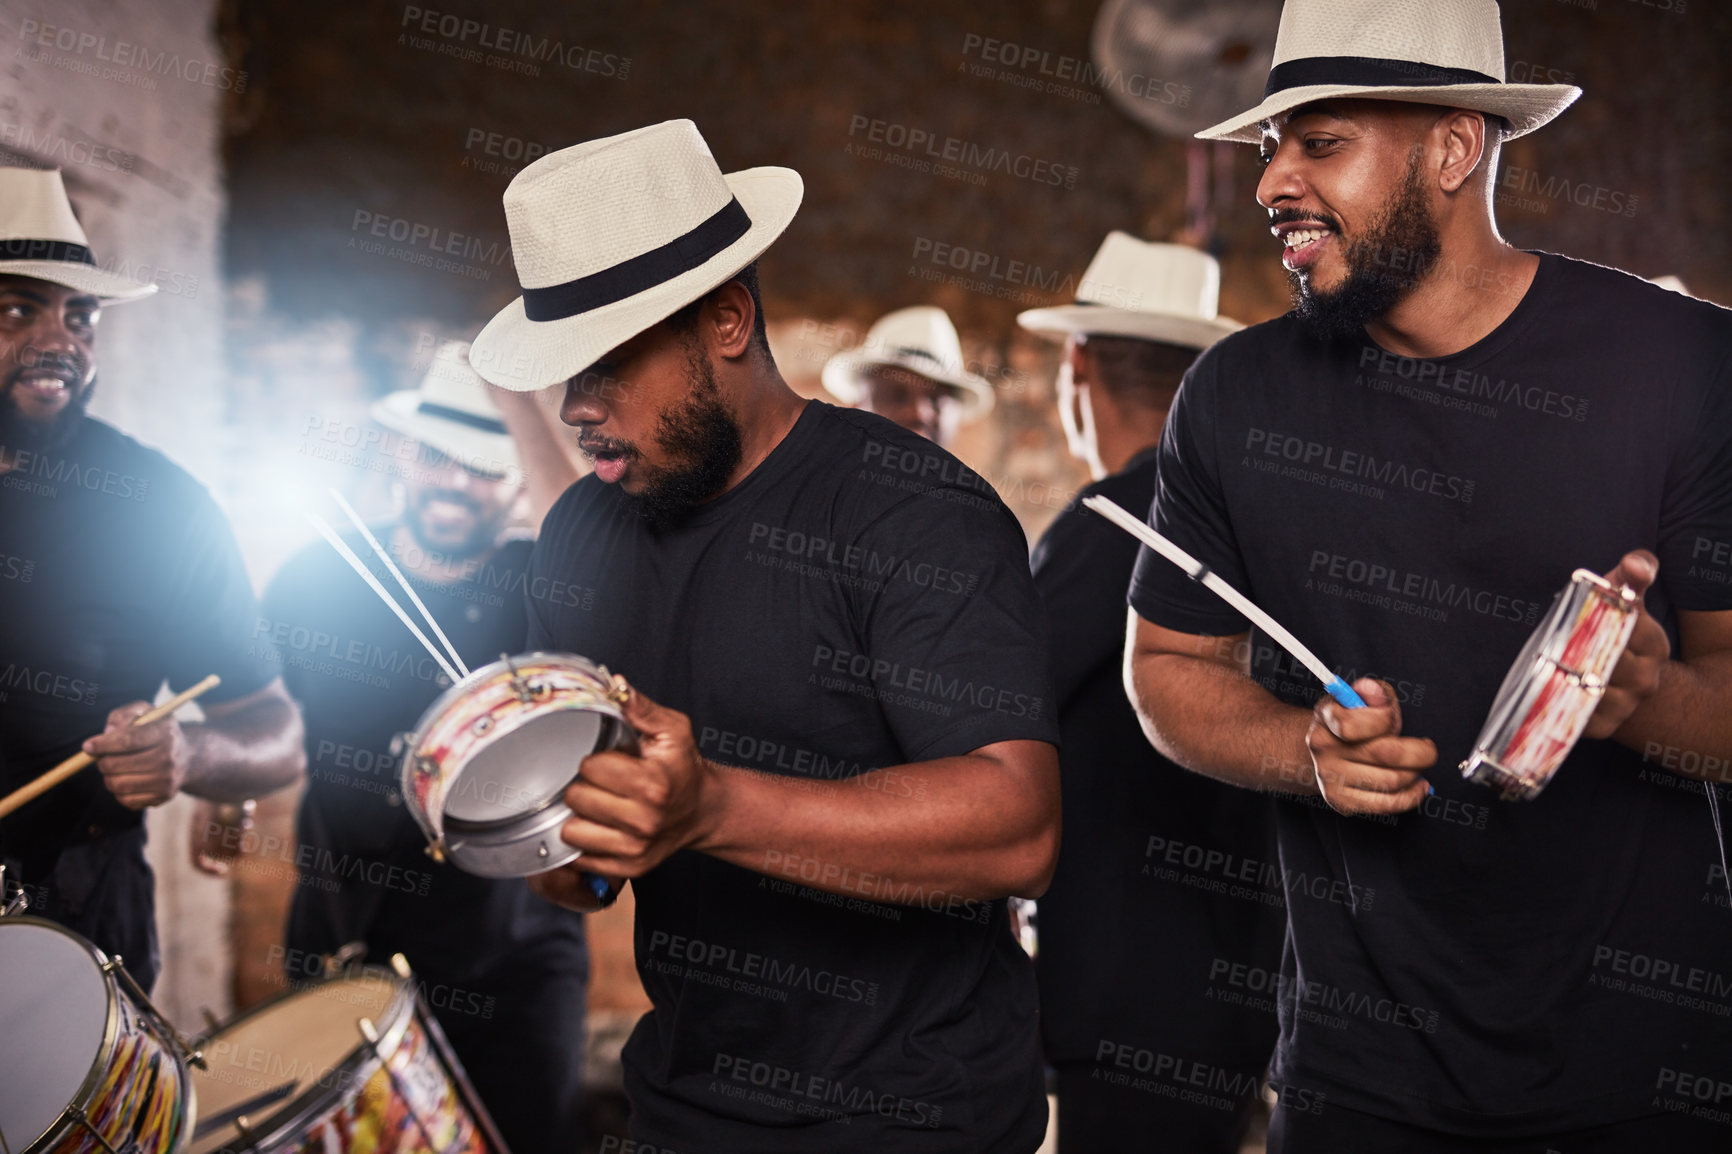 Buy stock photo Shot of a group of musical performers playing together